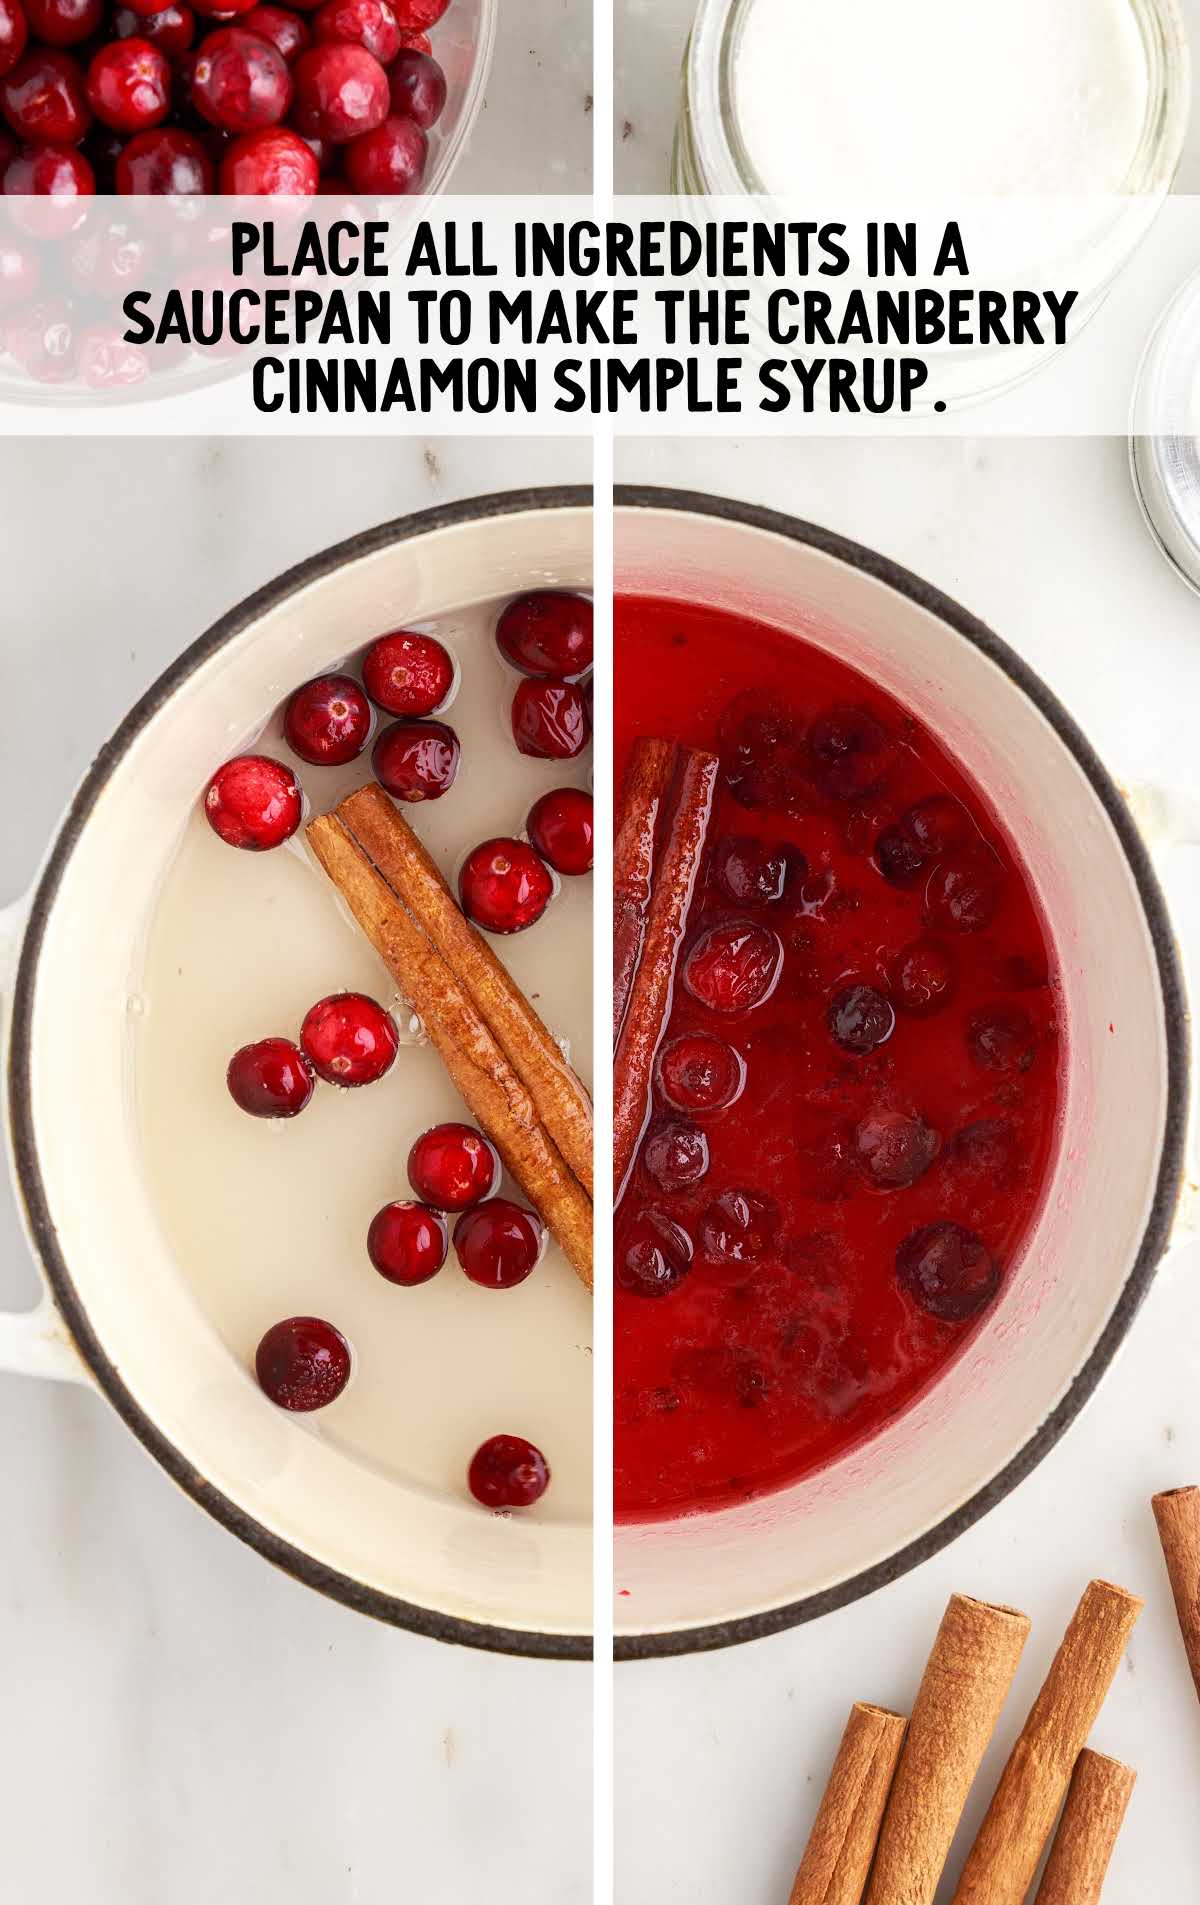 ingredients placed in a small saucepan to make the cranberry cinnamon simple syrup